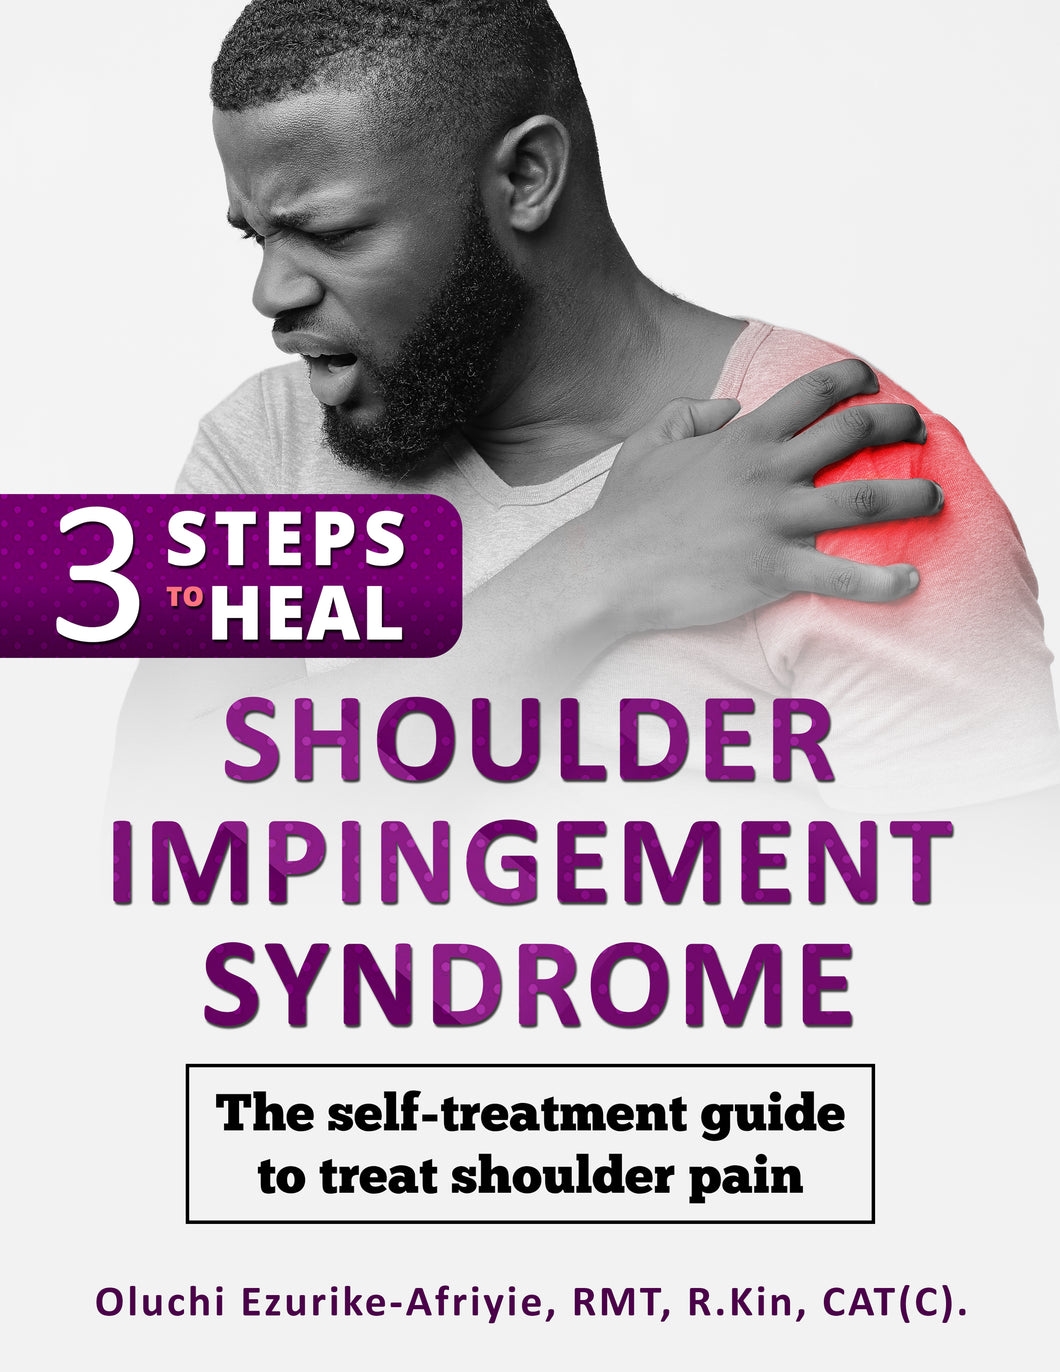 3 Steps to Heal Shoulder Impingement Syndrome: The self-treatment guide to treat shoulder pain